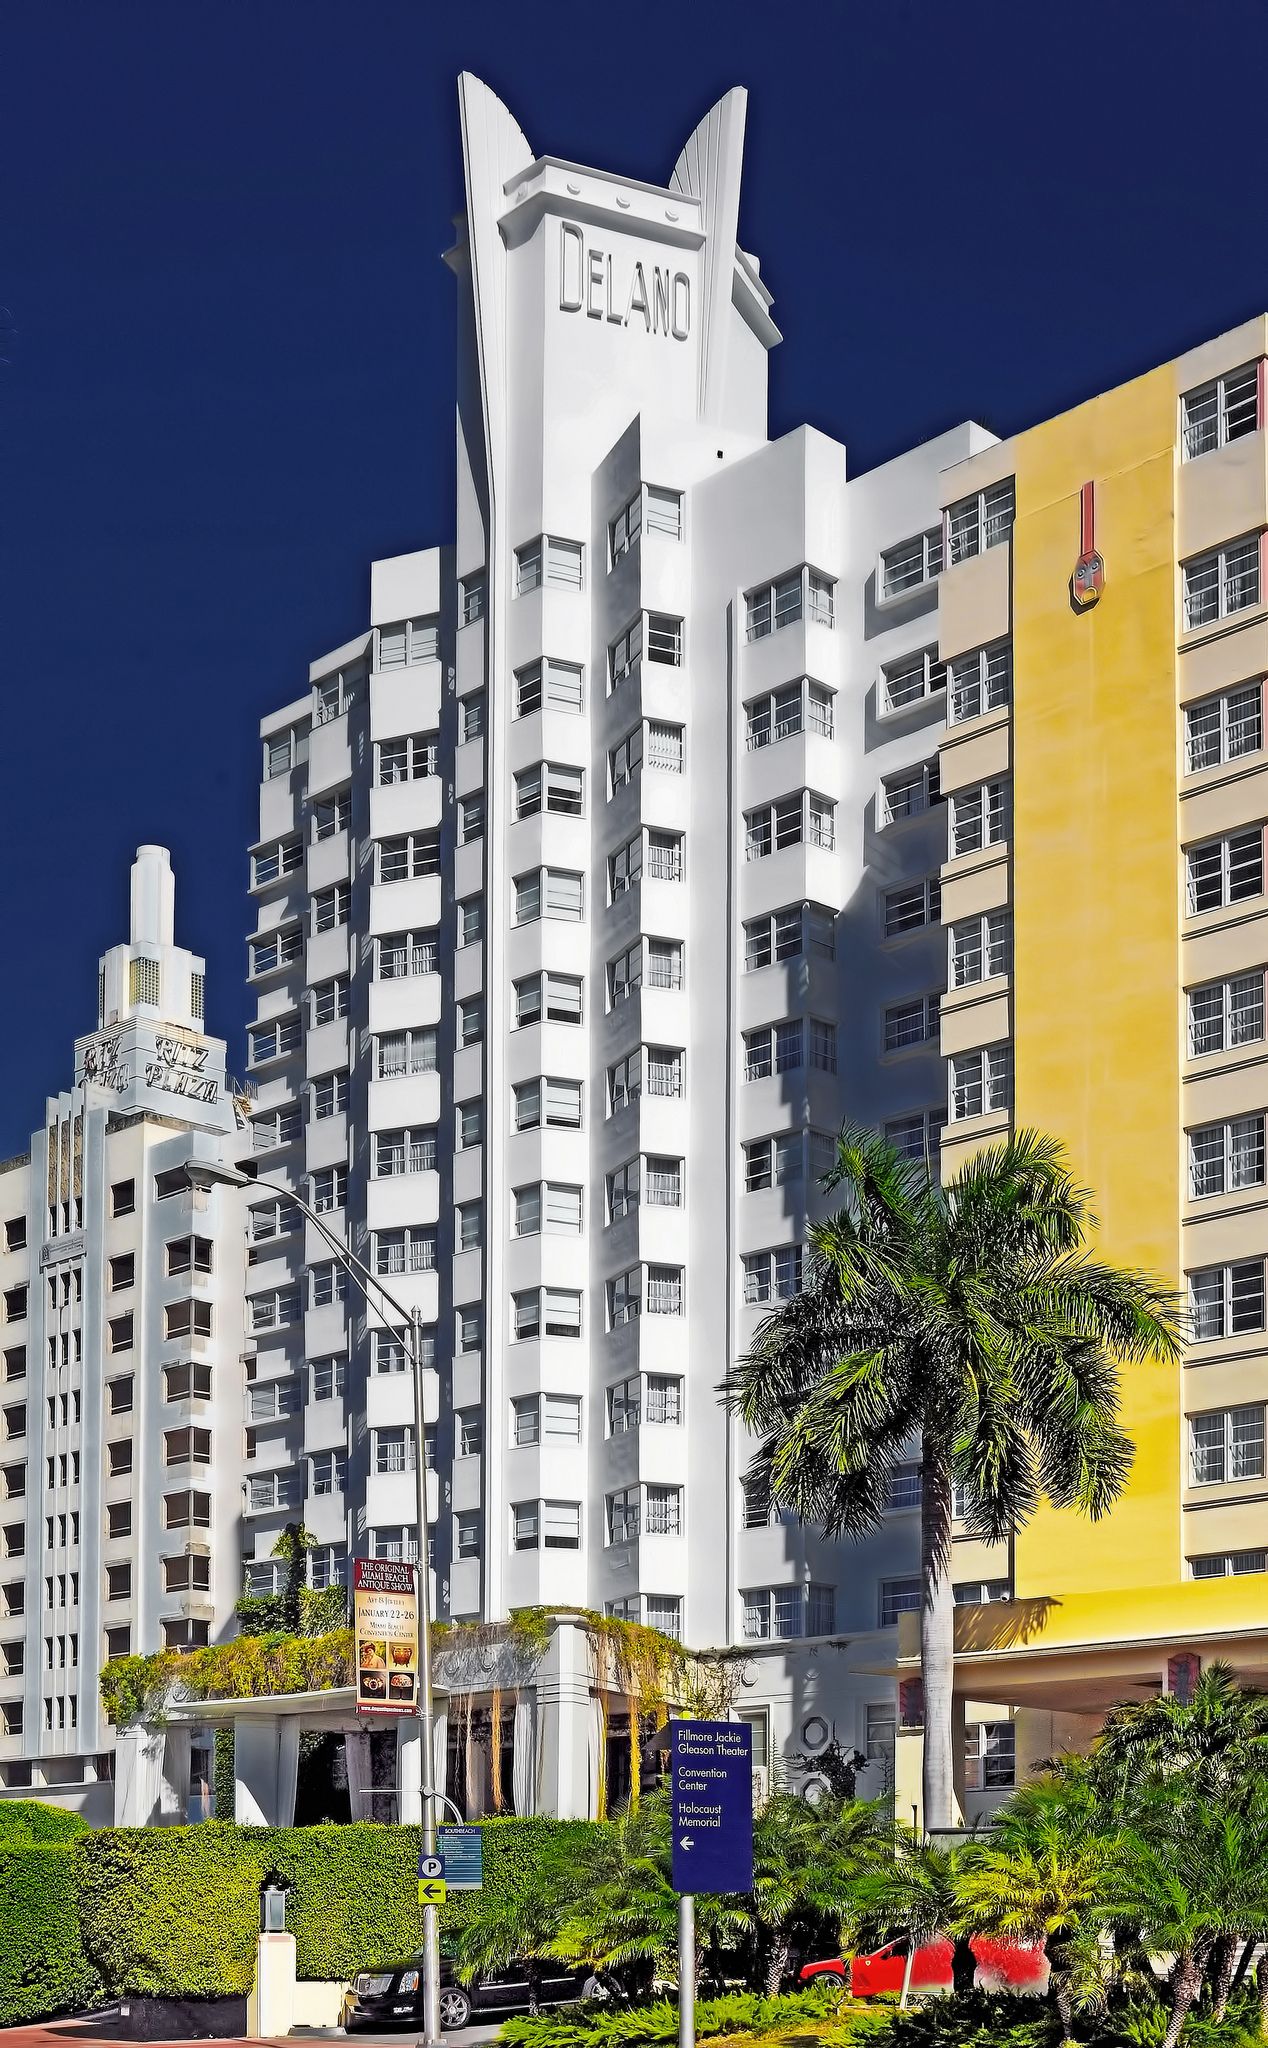 The Delano Hotel is a legendary Art Deco landmark on Collins Avenue, known for its iconic white facade, sleek lines, and minimalist design. Built in 1947, it has been beautifully restored and is now a luxury hotel that epitomizes modern luxury and sophistication.]]>